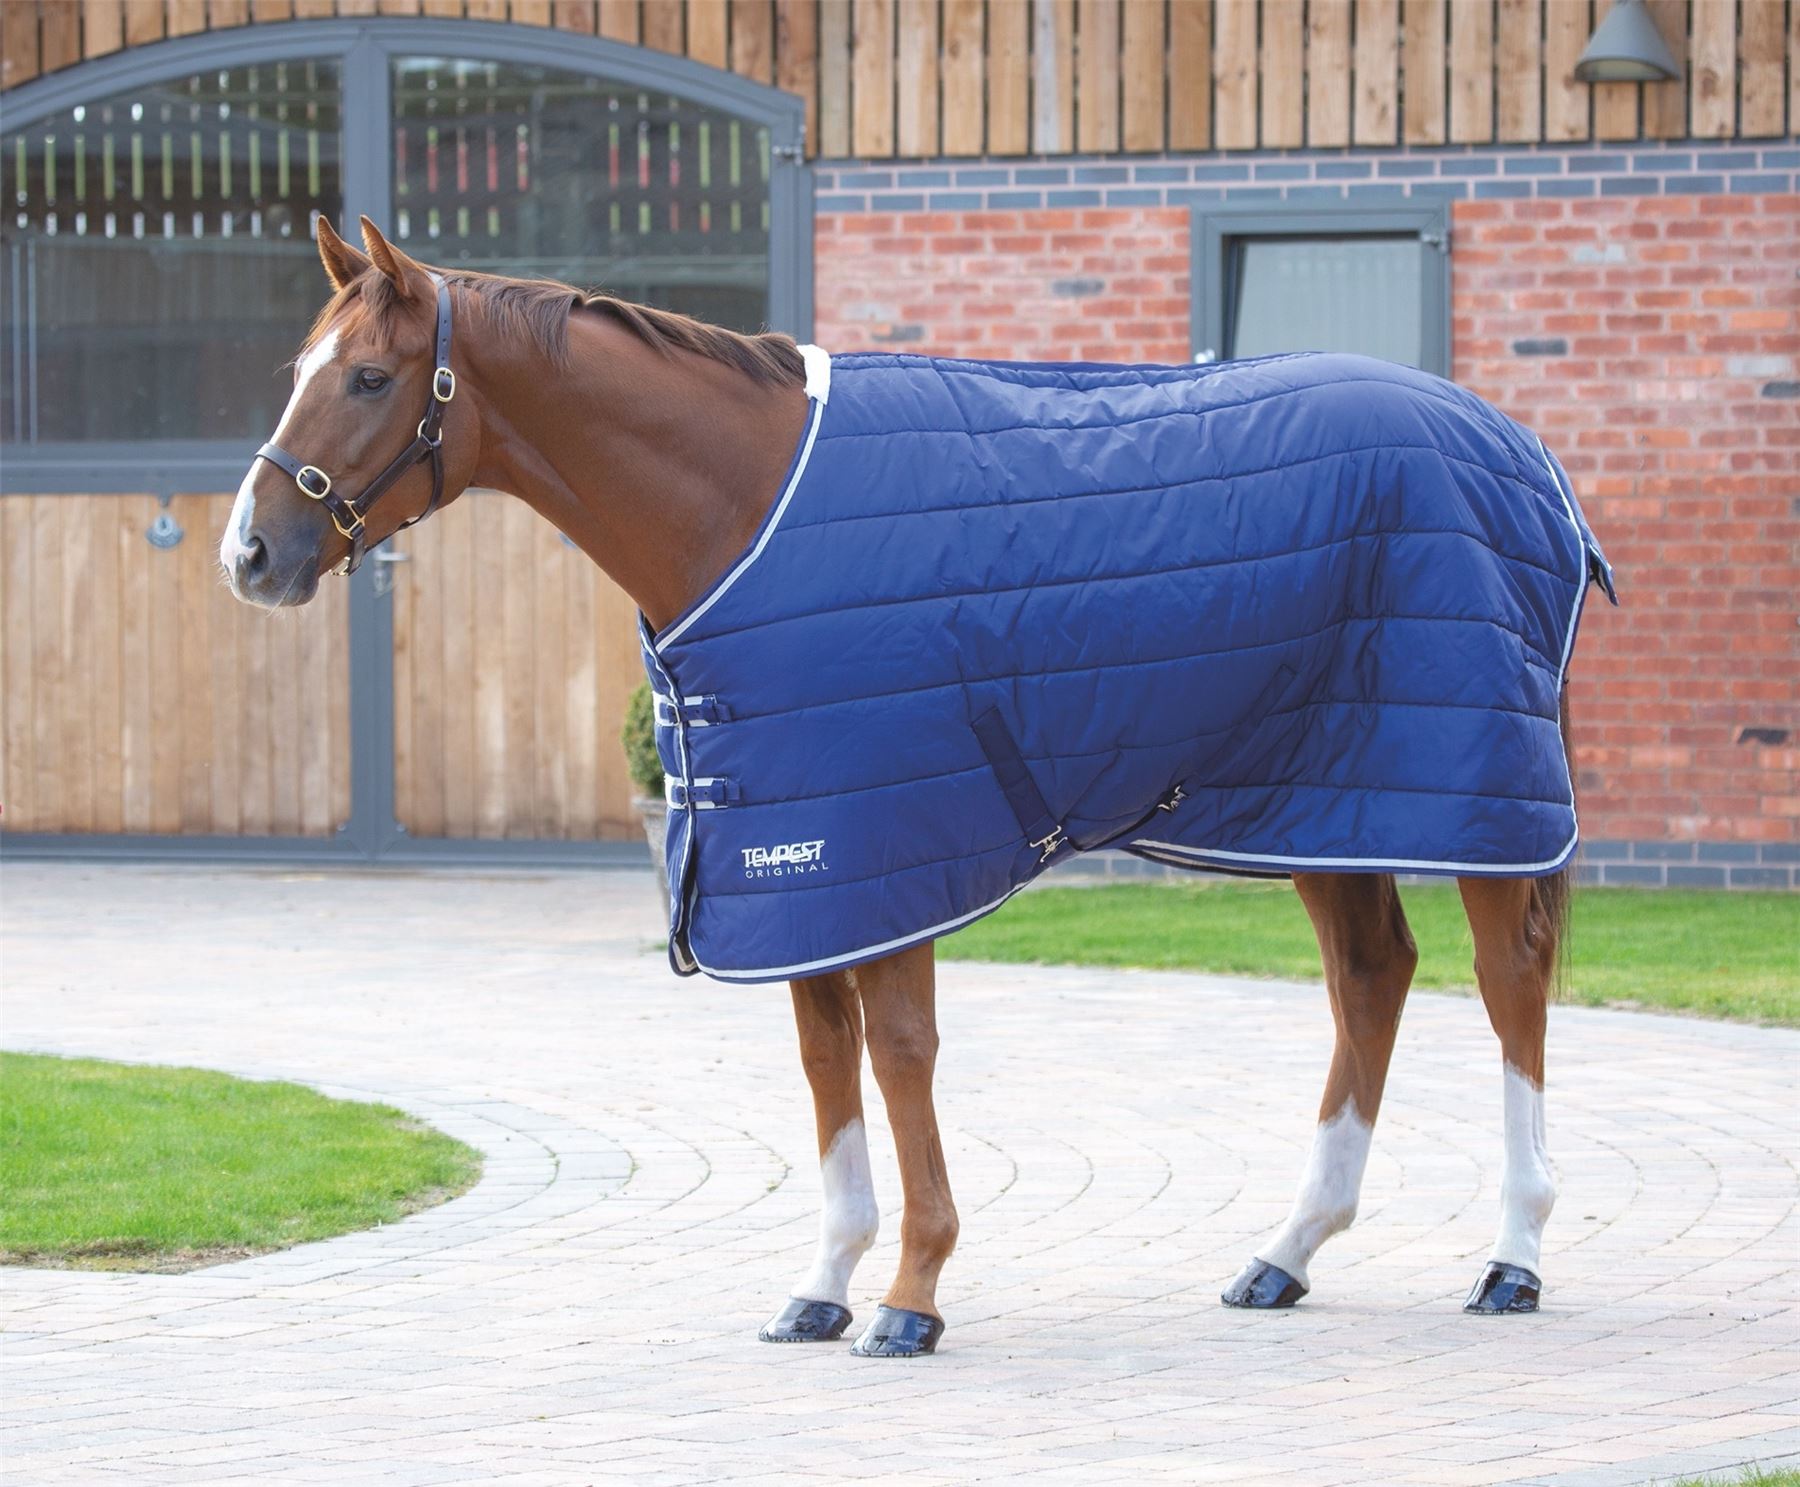 Shires Tempest Original 200 Stable Rug - Just Horse Riders